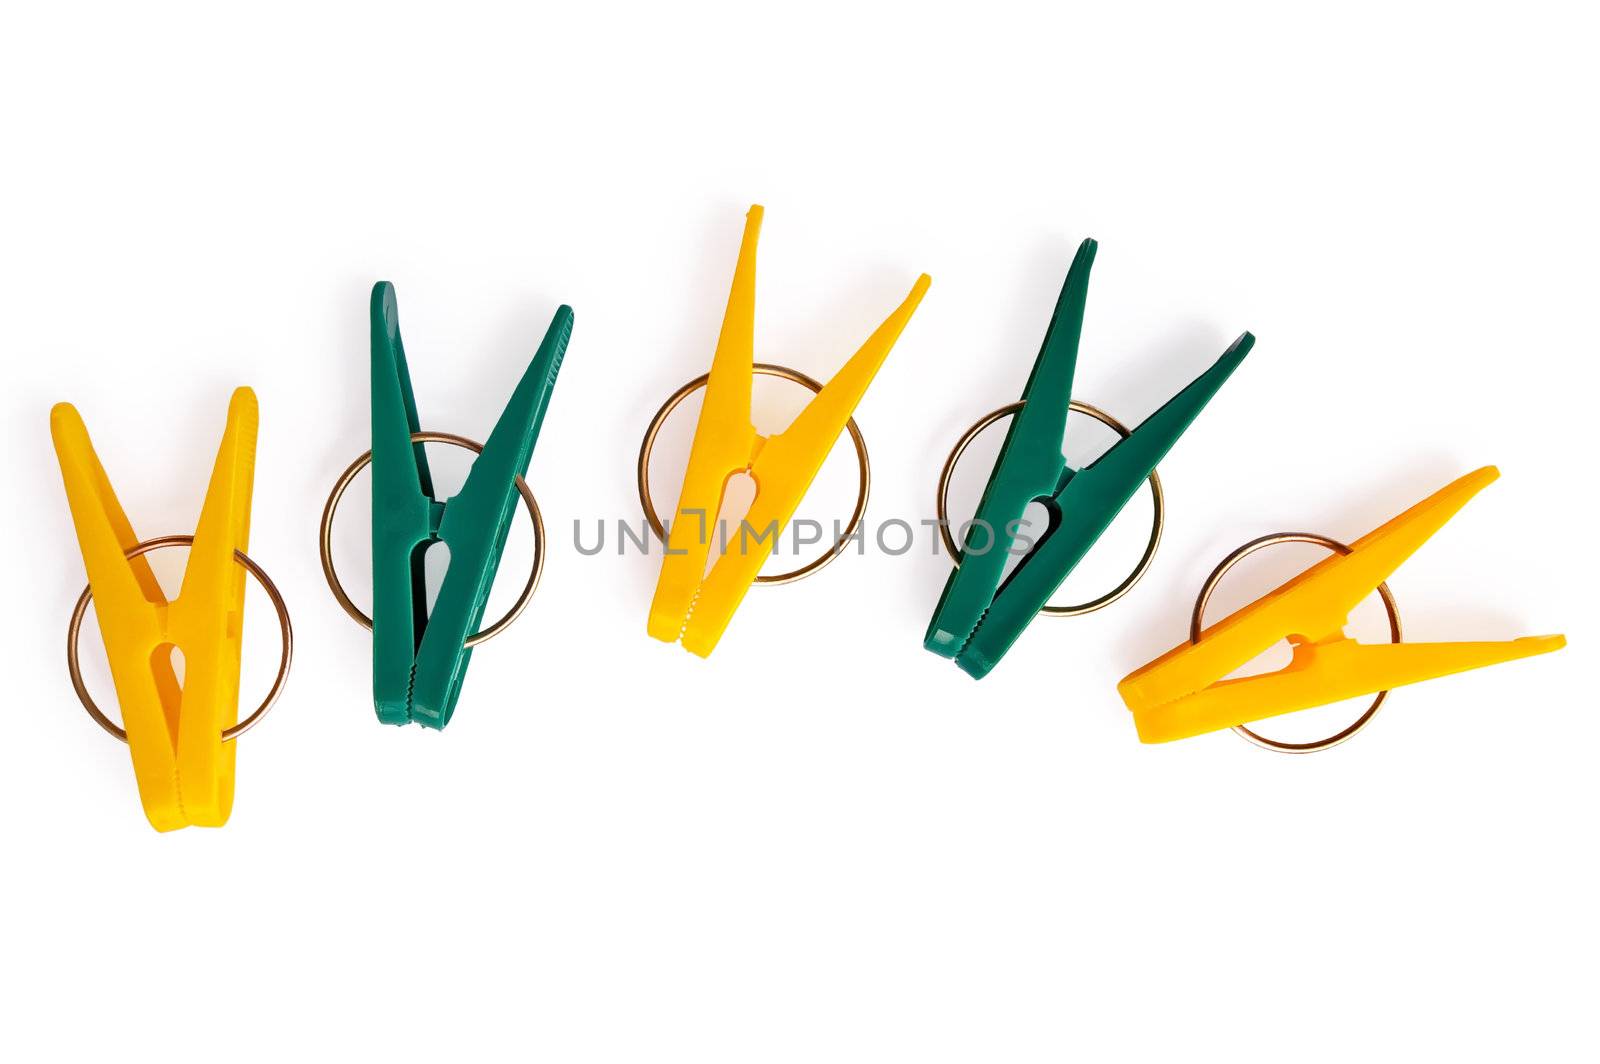 A number of yellow and green clothespins isolated on a white background